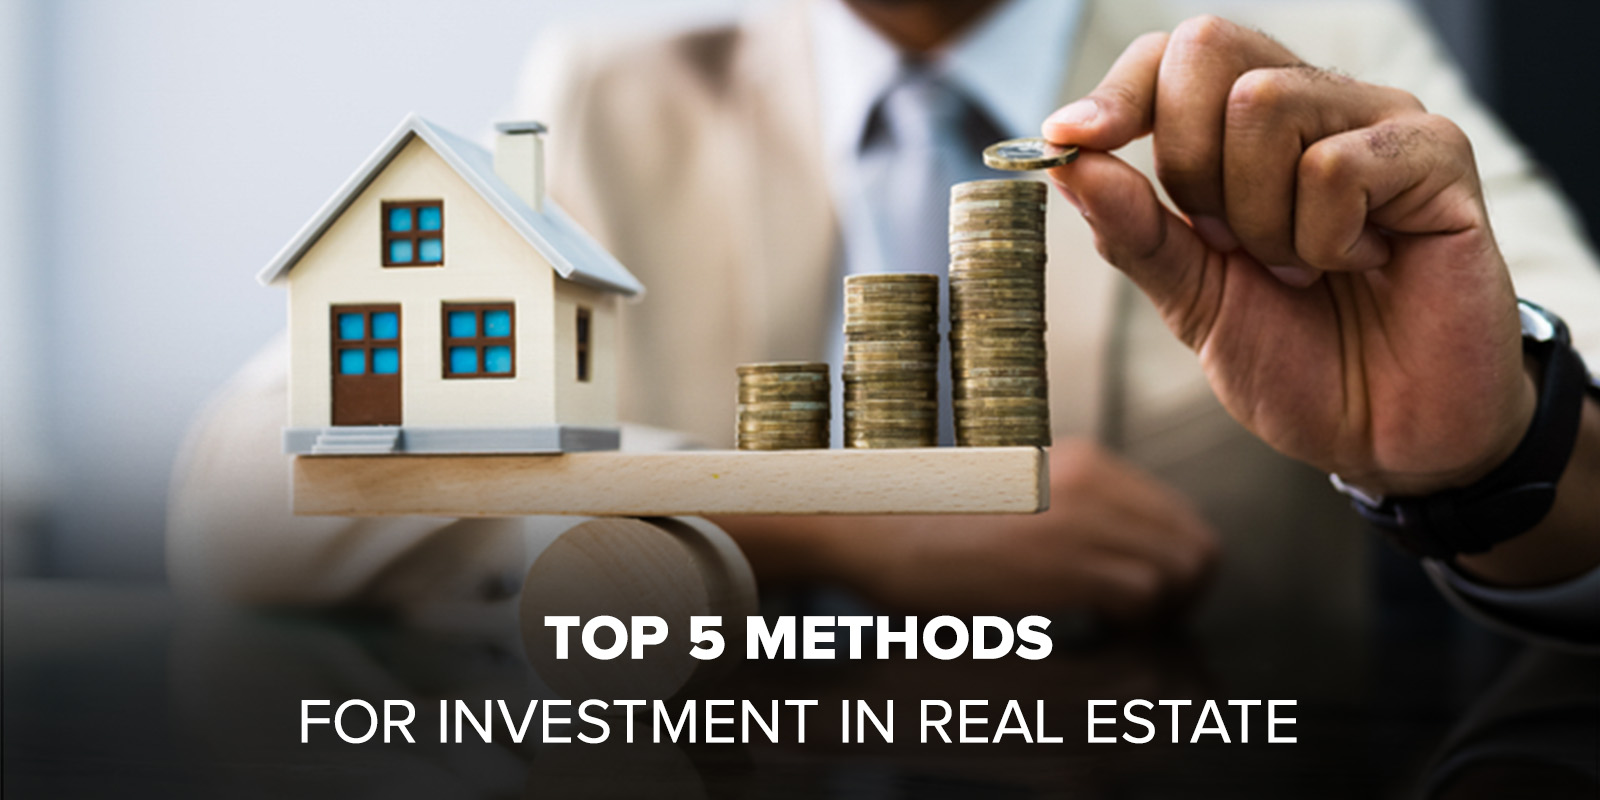 Top 5 Methods for Investment in Real Estate